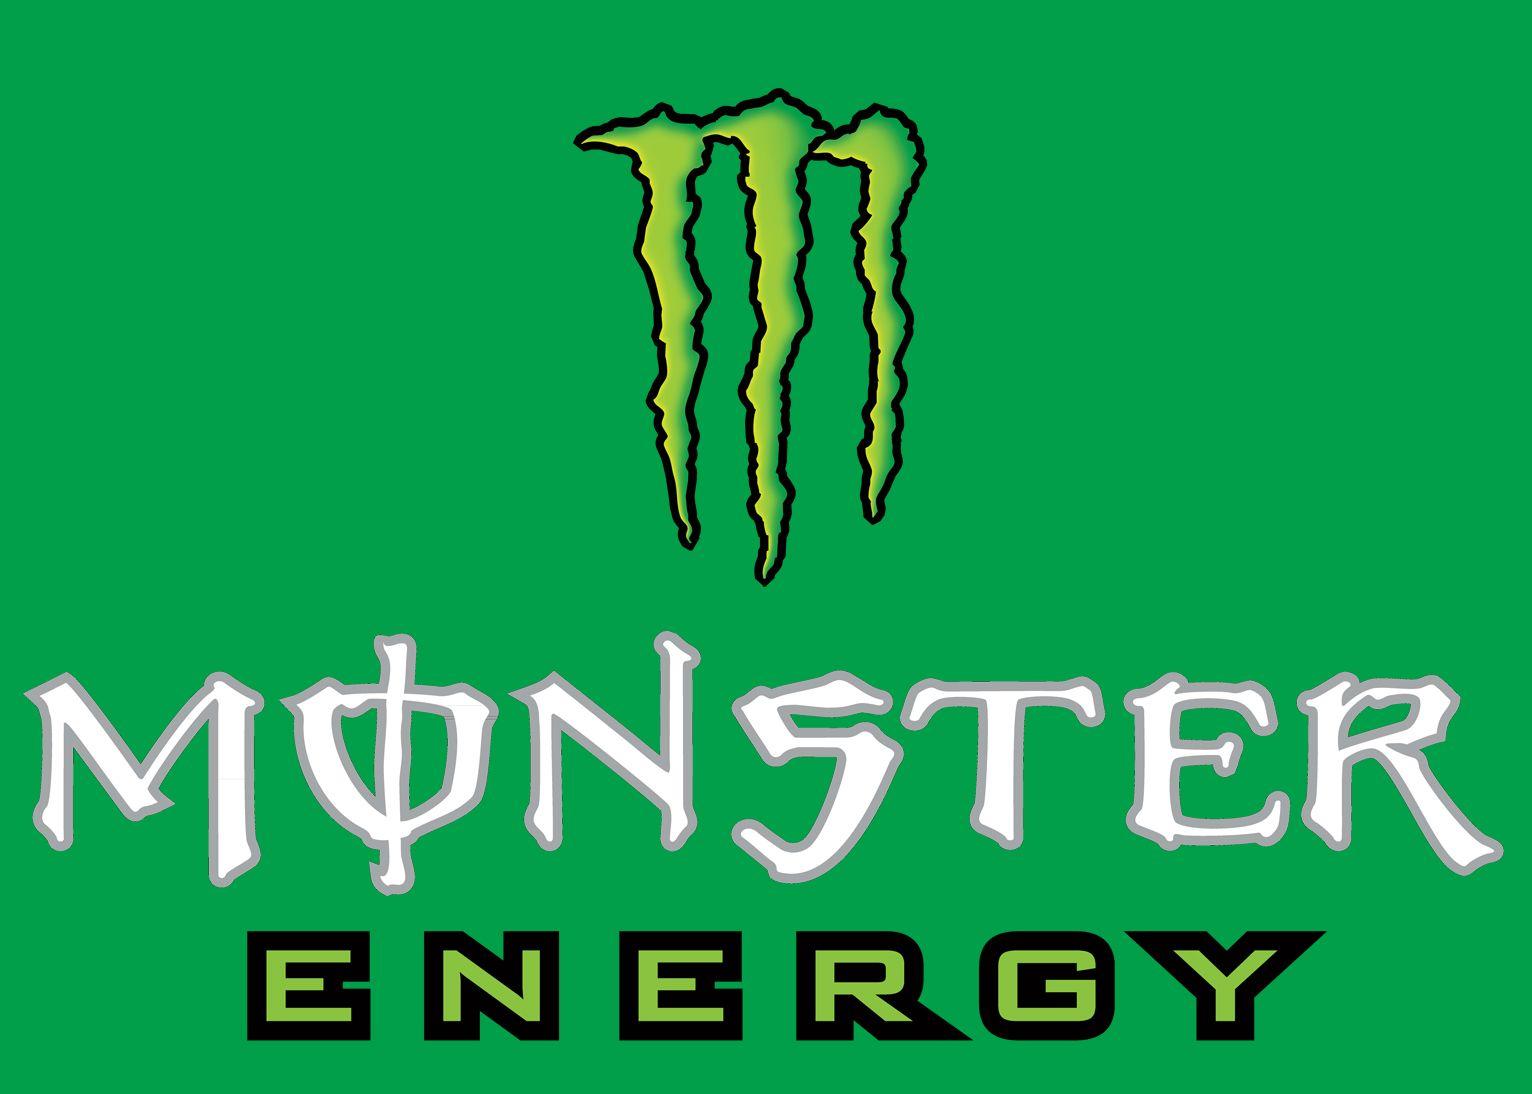 The Monster Energy Logo - Monster Energy Logo, Monster Energy Symbol, Meaning, History and ...